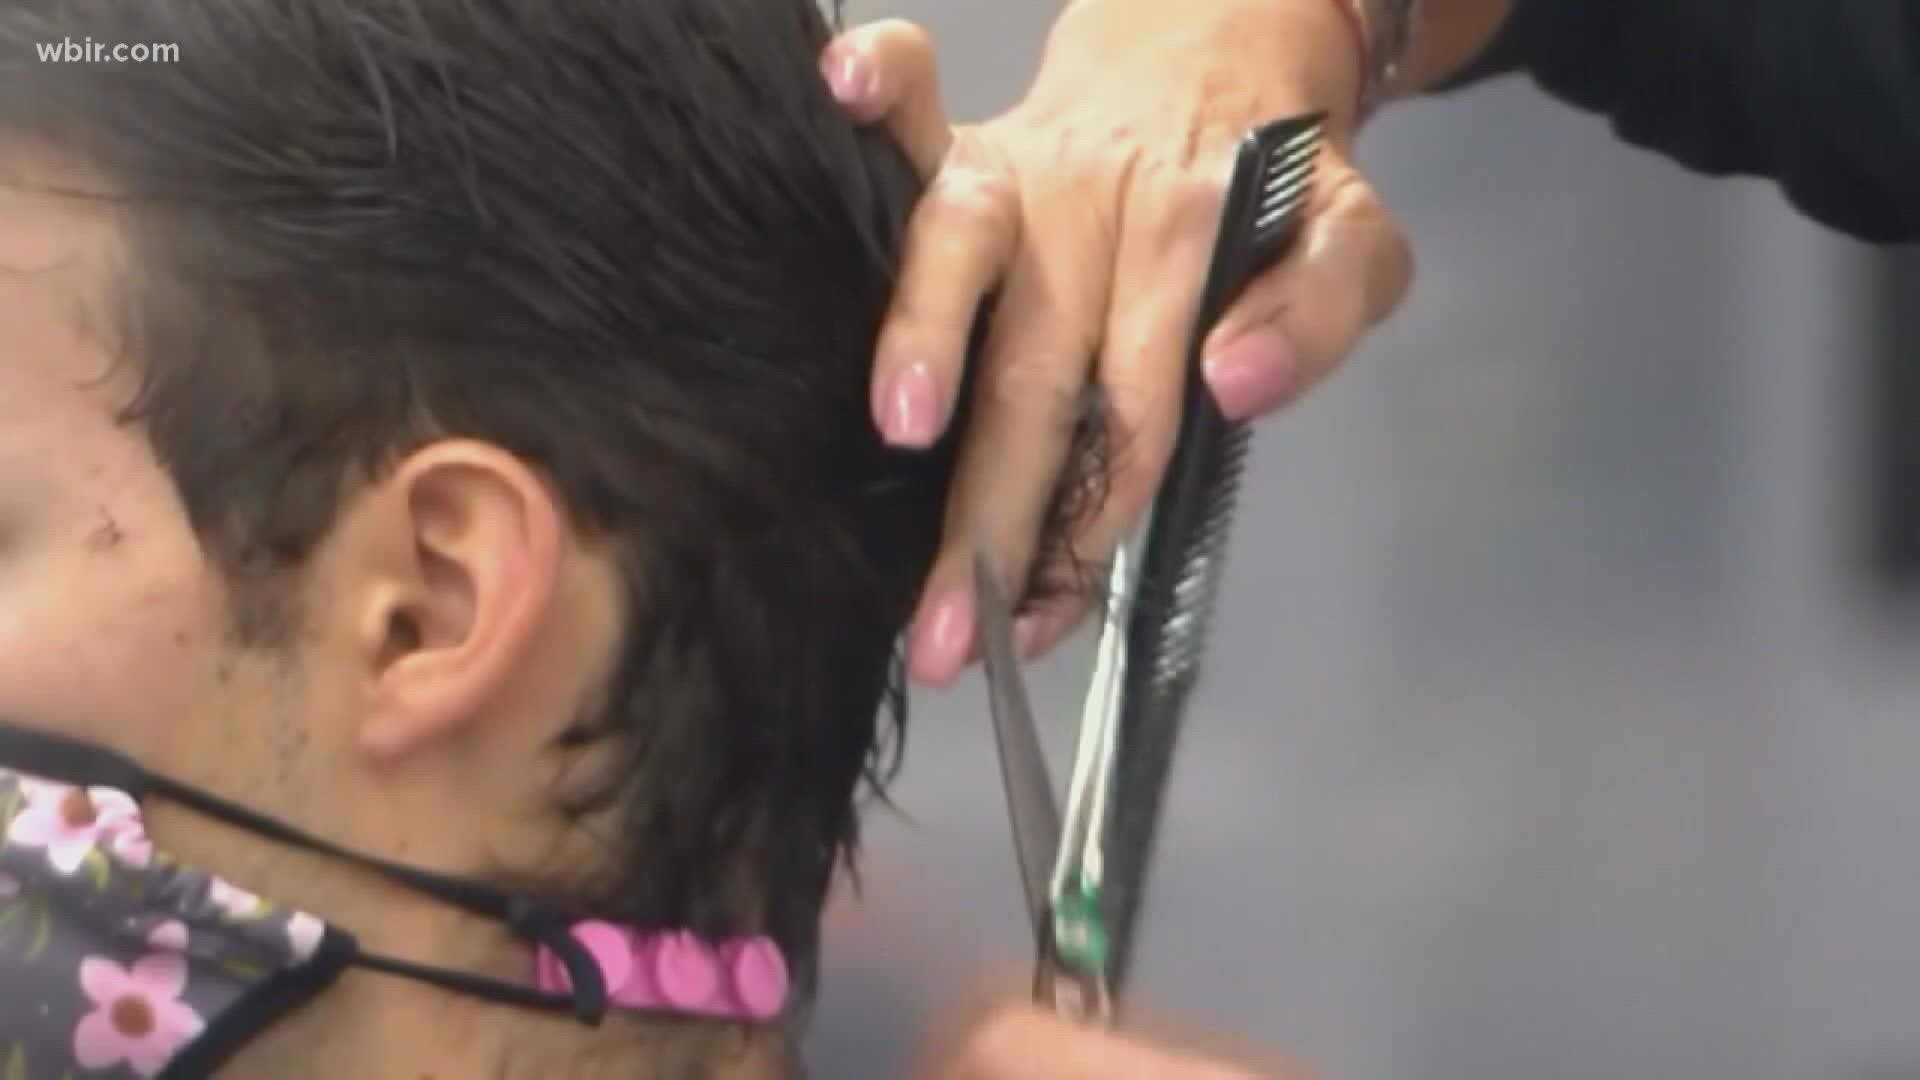 A state law is requiring hairstylists to take training on how to identify domestic abuse and connect people with resources. However, they are not mandatory reporters